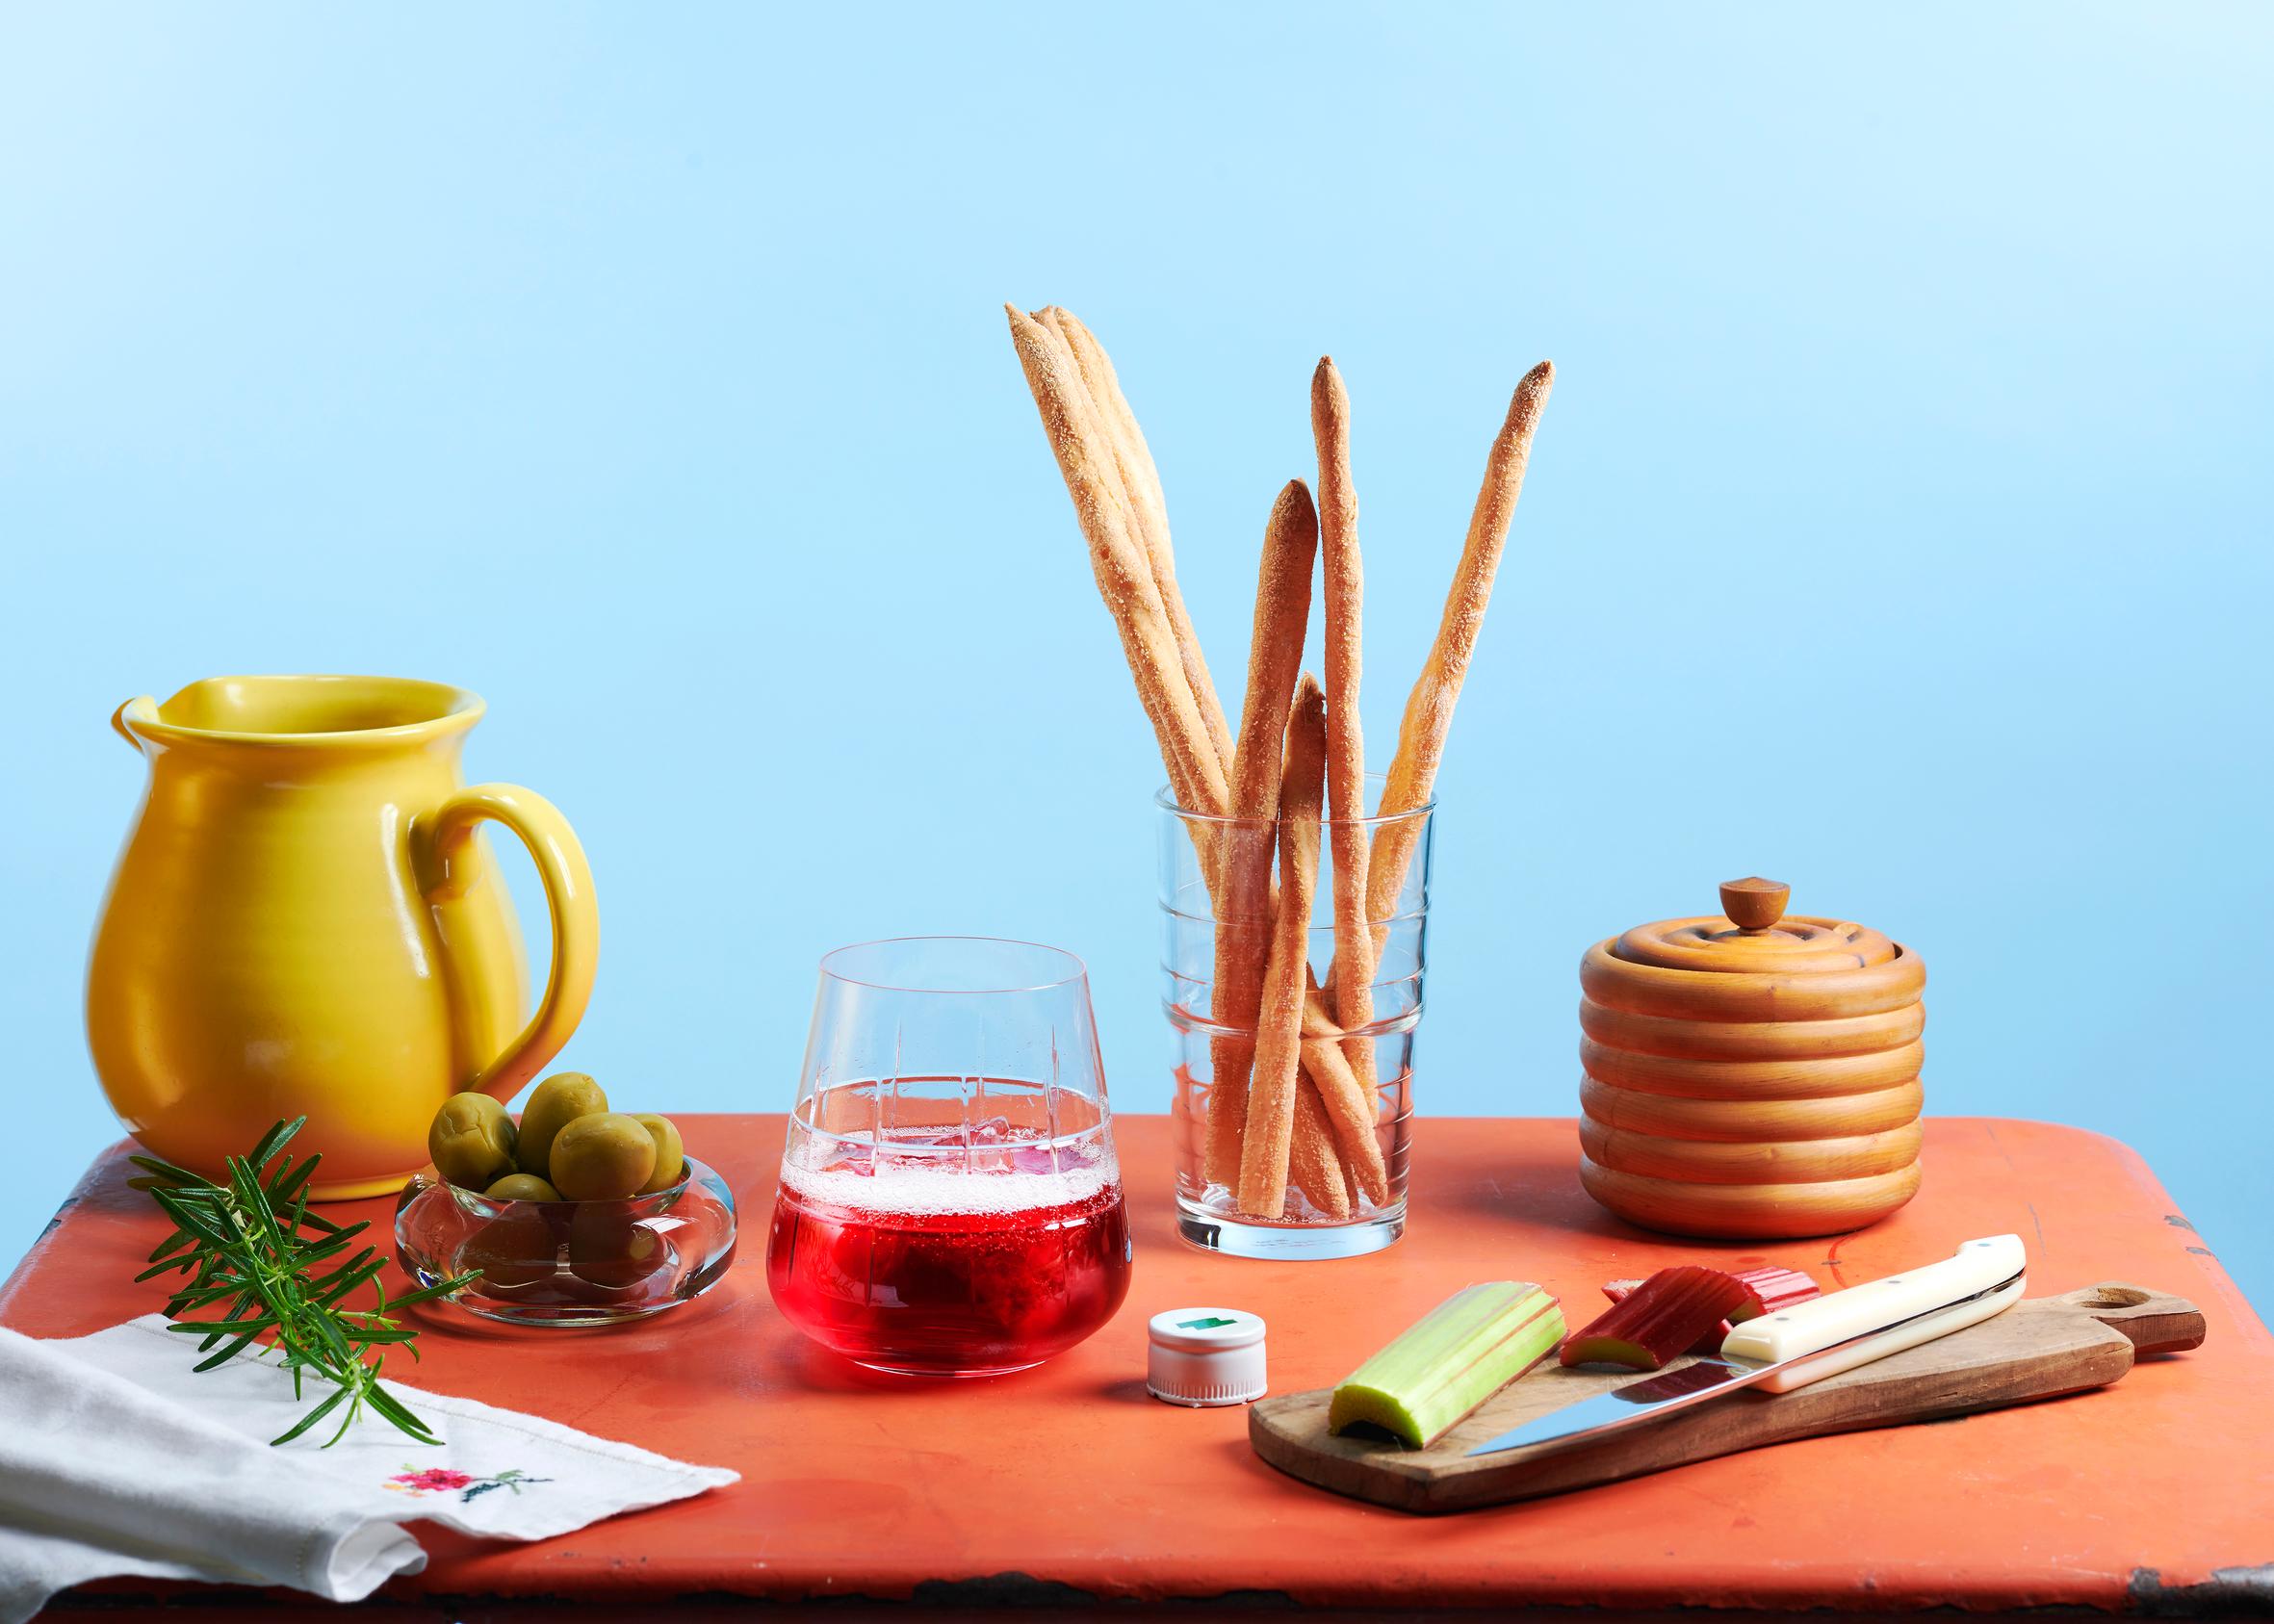 Scene with a yellow ceramic jug, olives, a sprig of rosemary, breadsticks, and fresh rhubarb